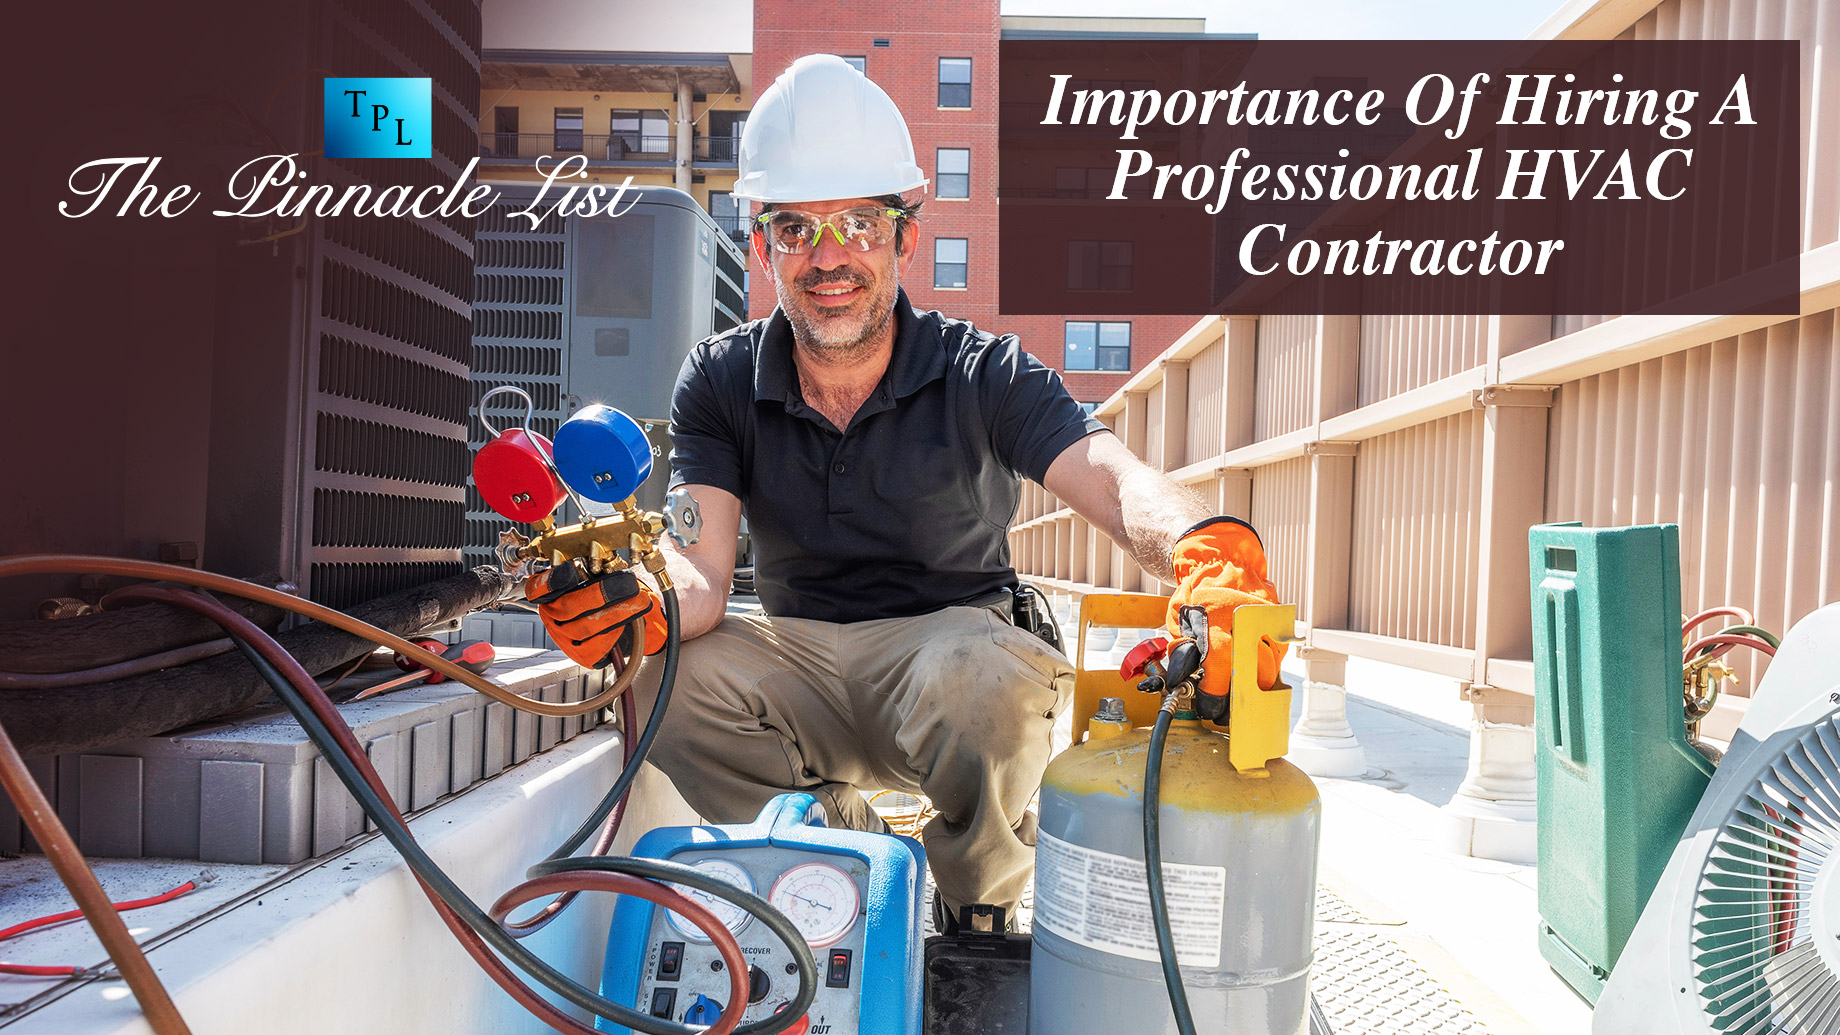 Importance Of Hiring A Professional HVAC Contractor